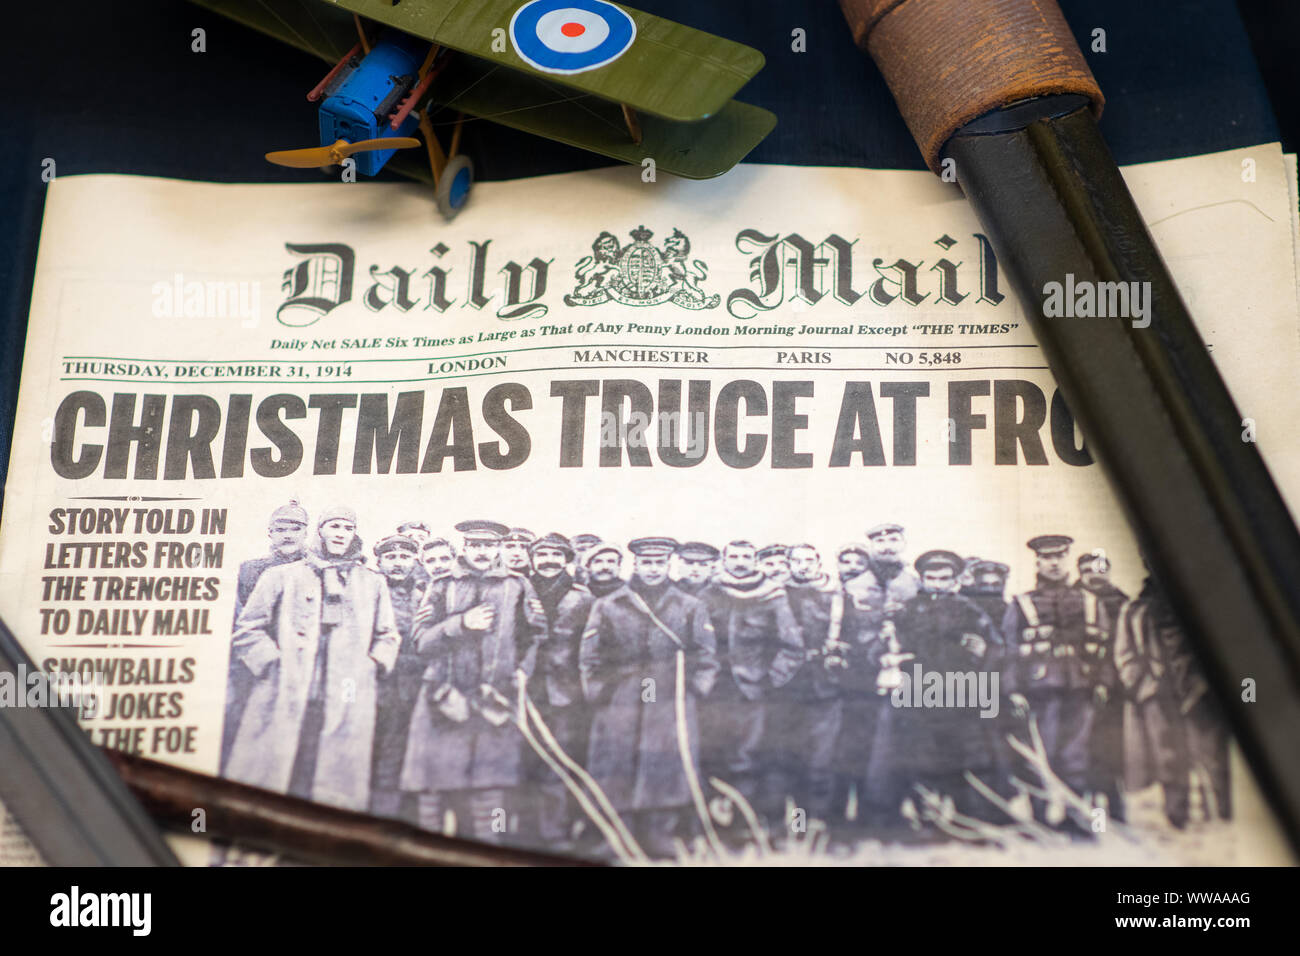 Doncaster, UK - 28th July 2019: Newspaper from Christmas WW1 showing the temporary truce. Daily Mail December 31 1914 Stock Photo